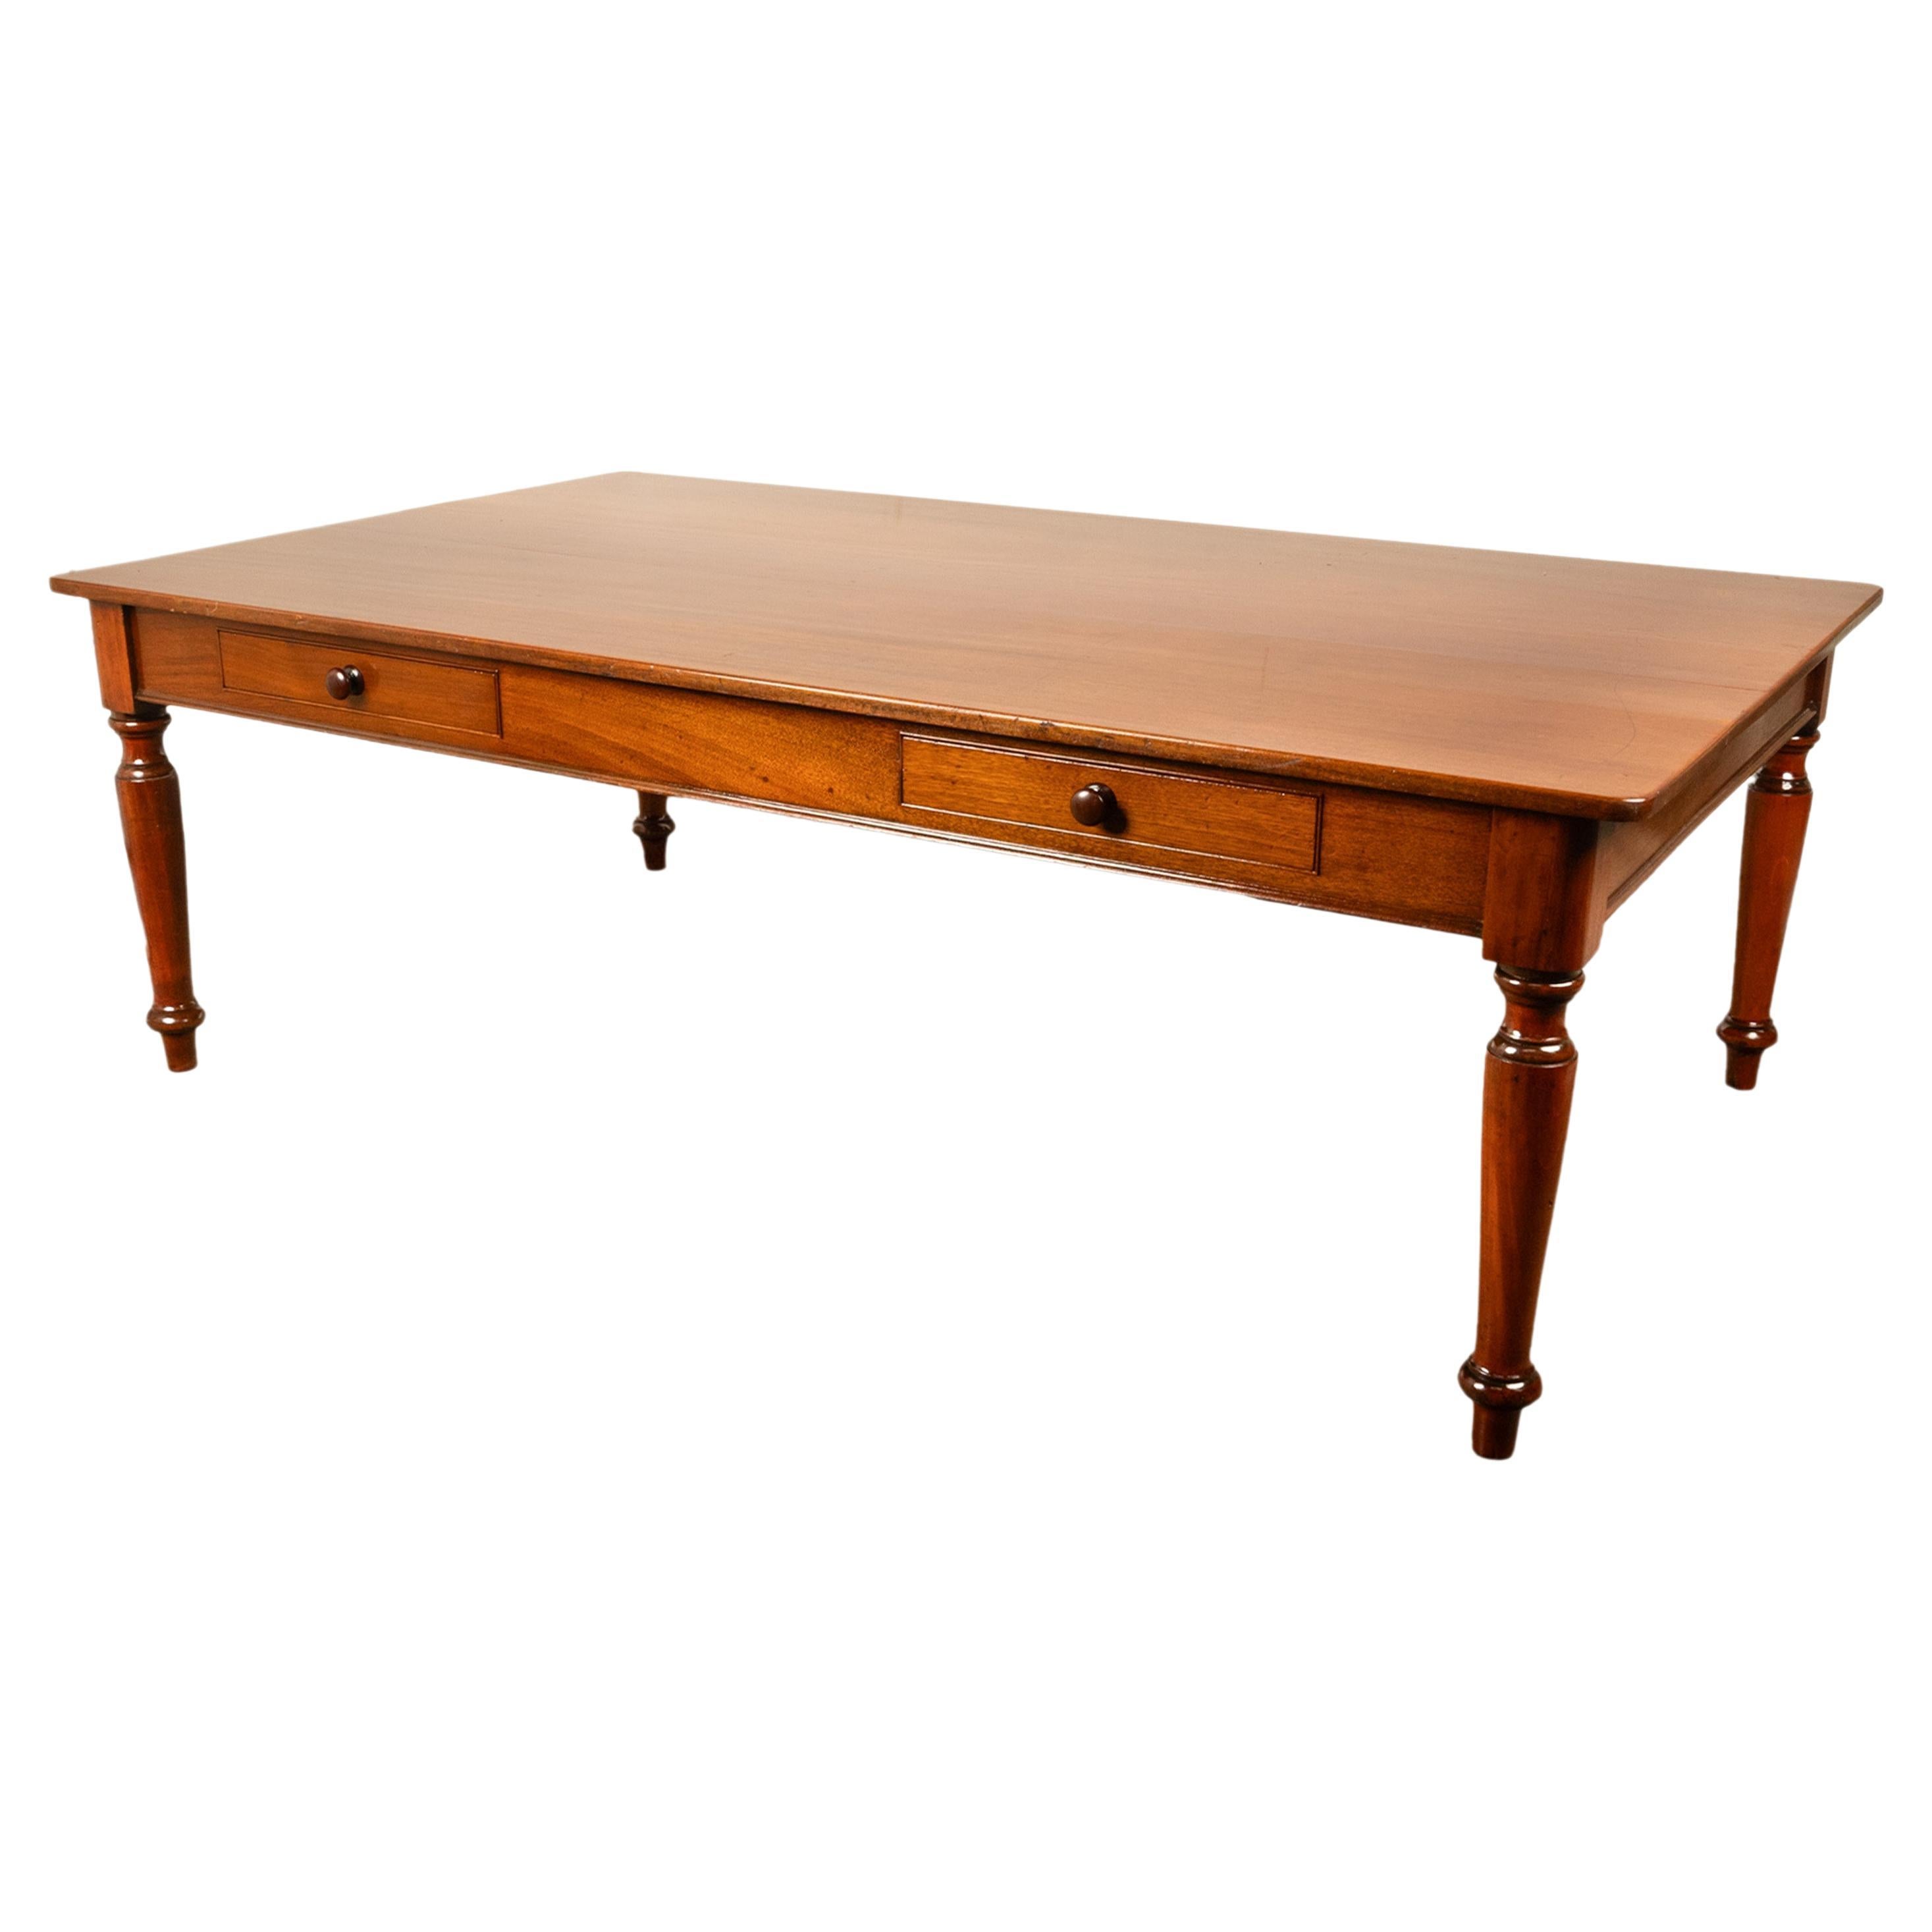 Antique Monumental 19th Century Mahogany Library Conference Dining Table 1860 For Sale